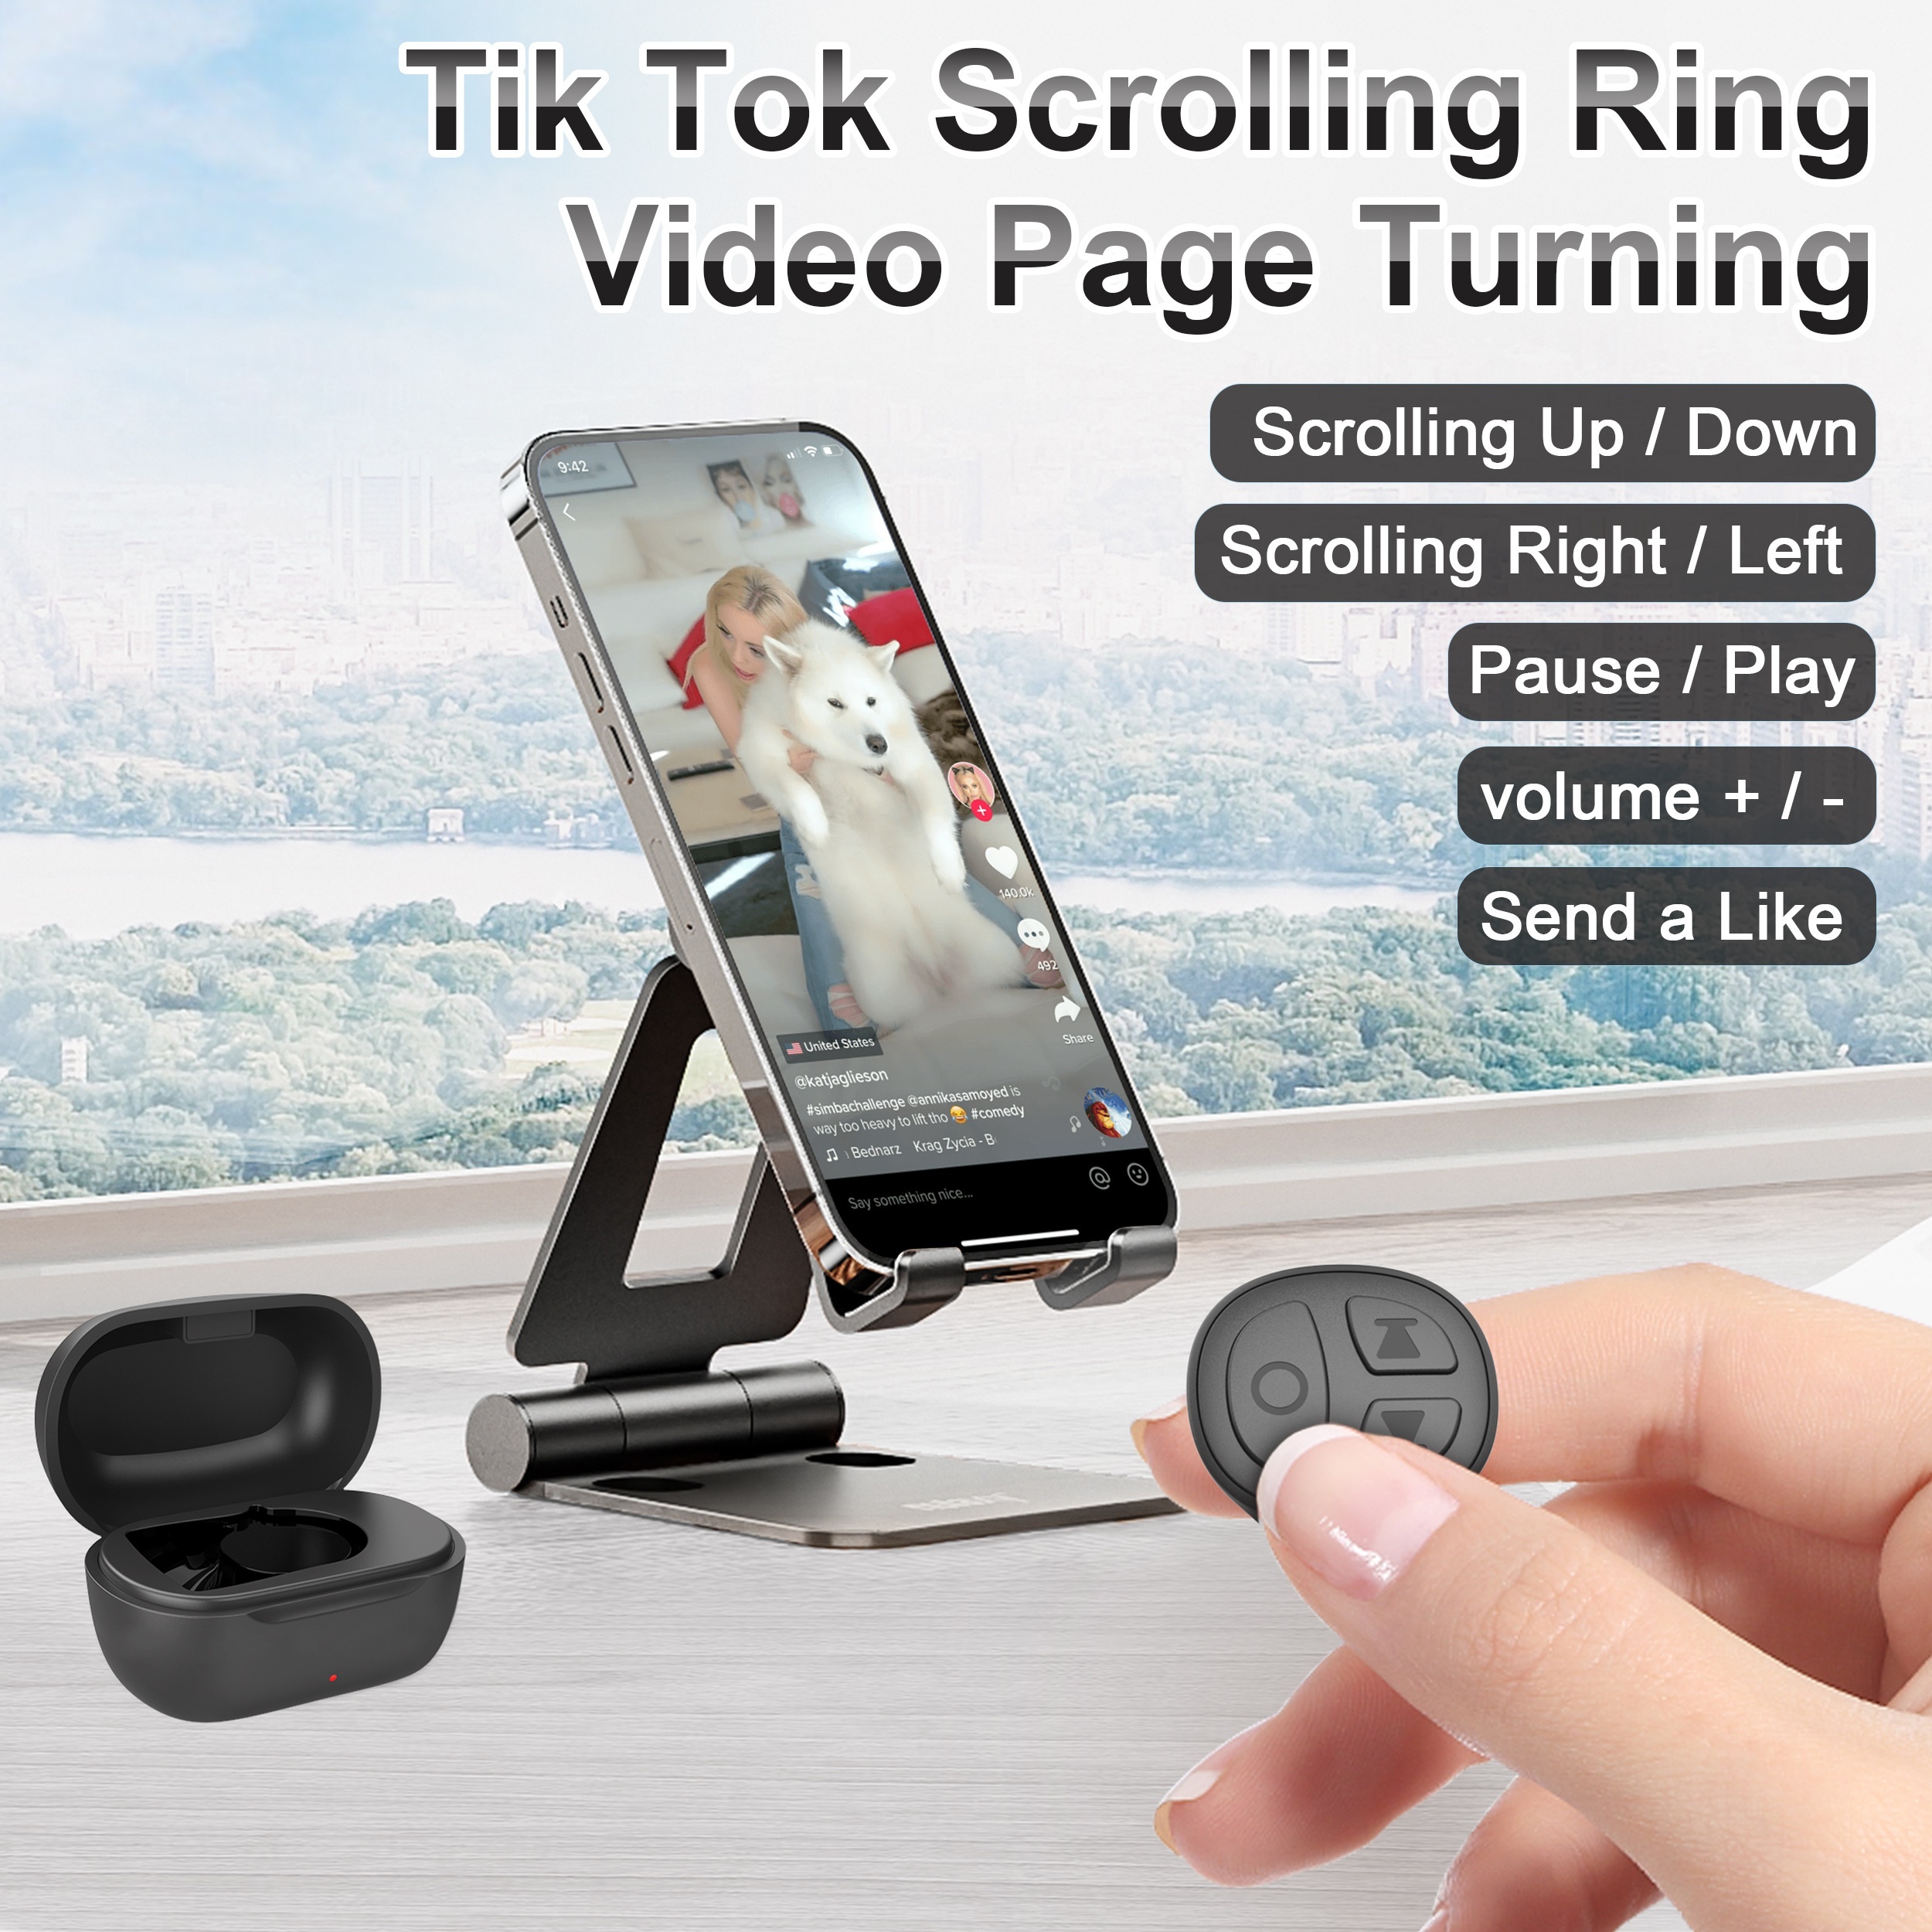  TikTok Remote Control Kindle App Page Turner, Bluetooth Camera  Video Recording Remote, TIK Tok Scrolling Ring for iPhone, iPad, iOS,  Android - Black : Electronics